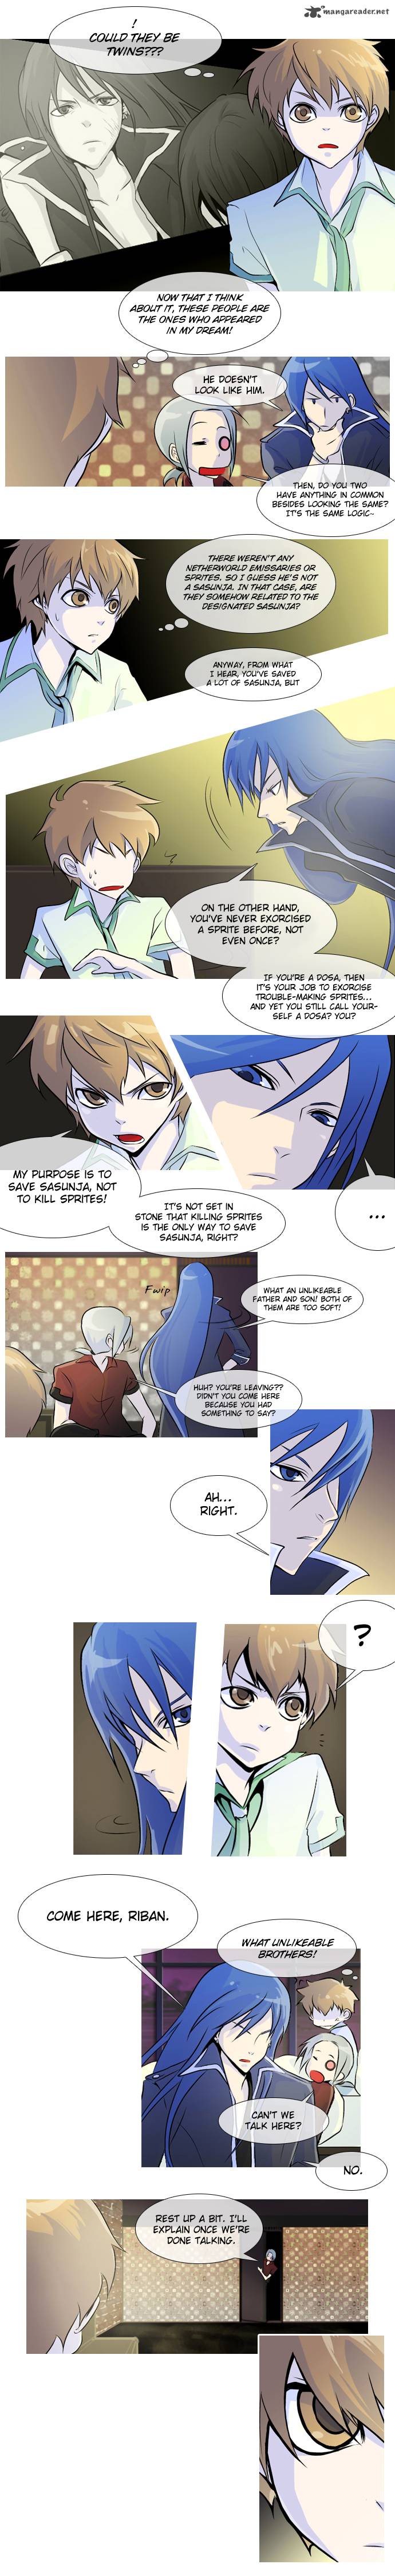 Timeline Chapter 8 Page 4